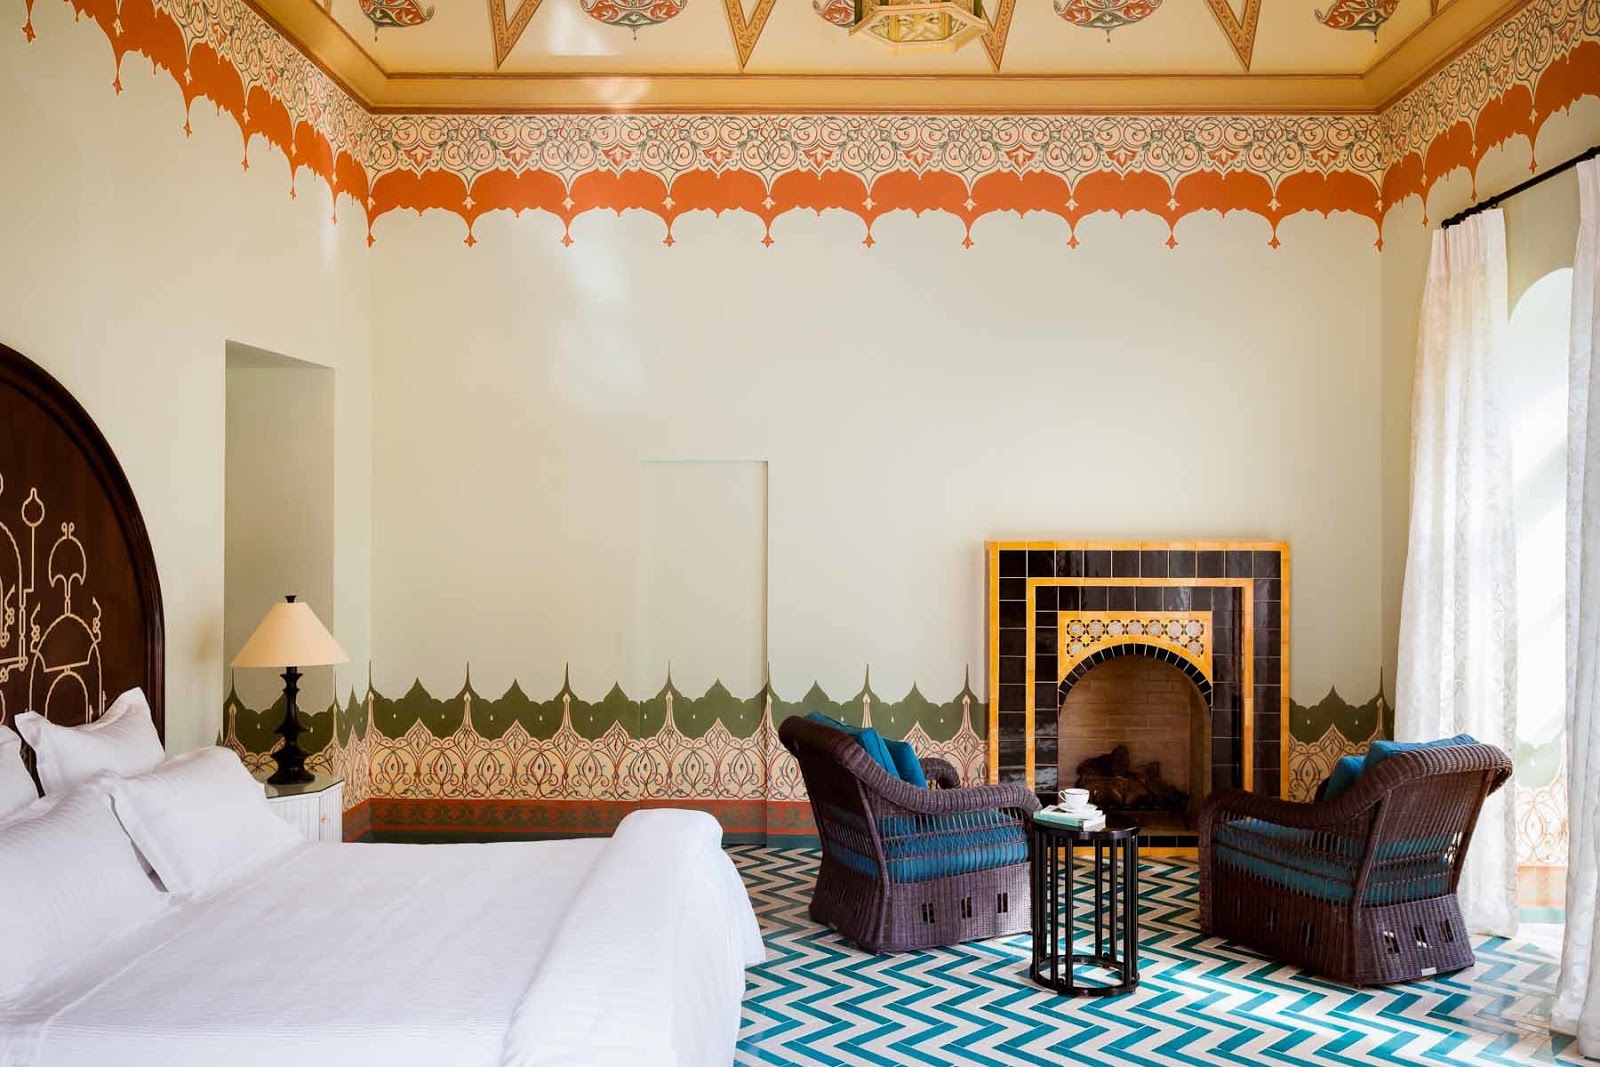 Marrakech inspired bedroom by Jerome Galland